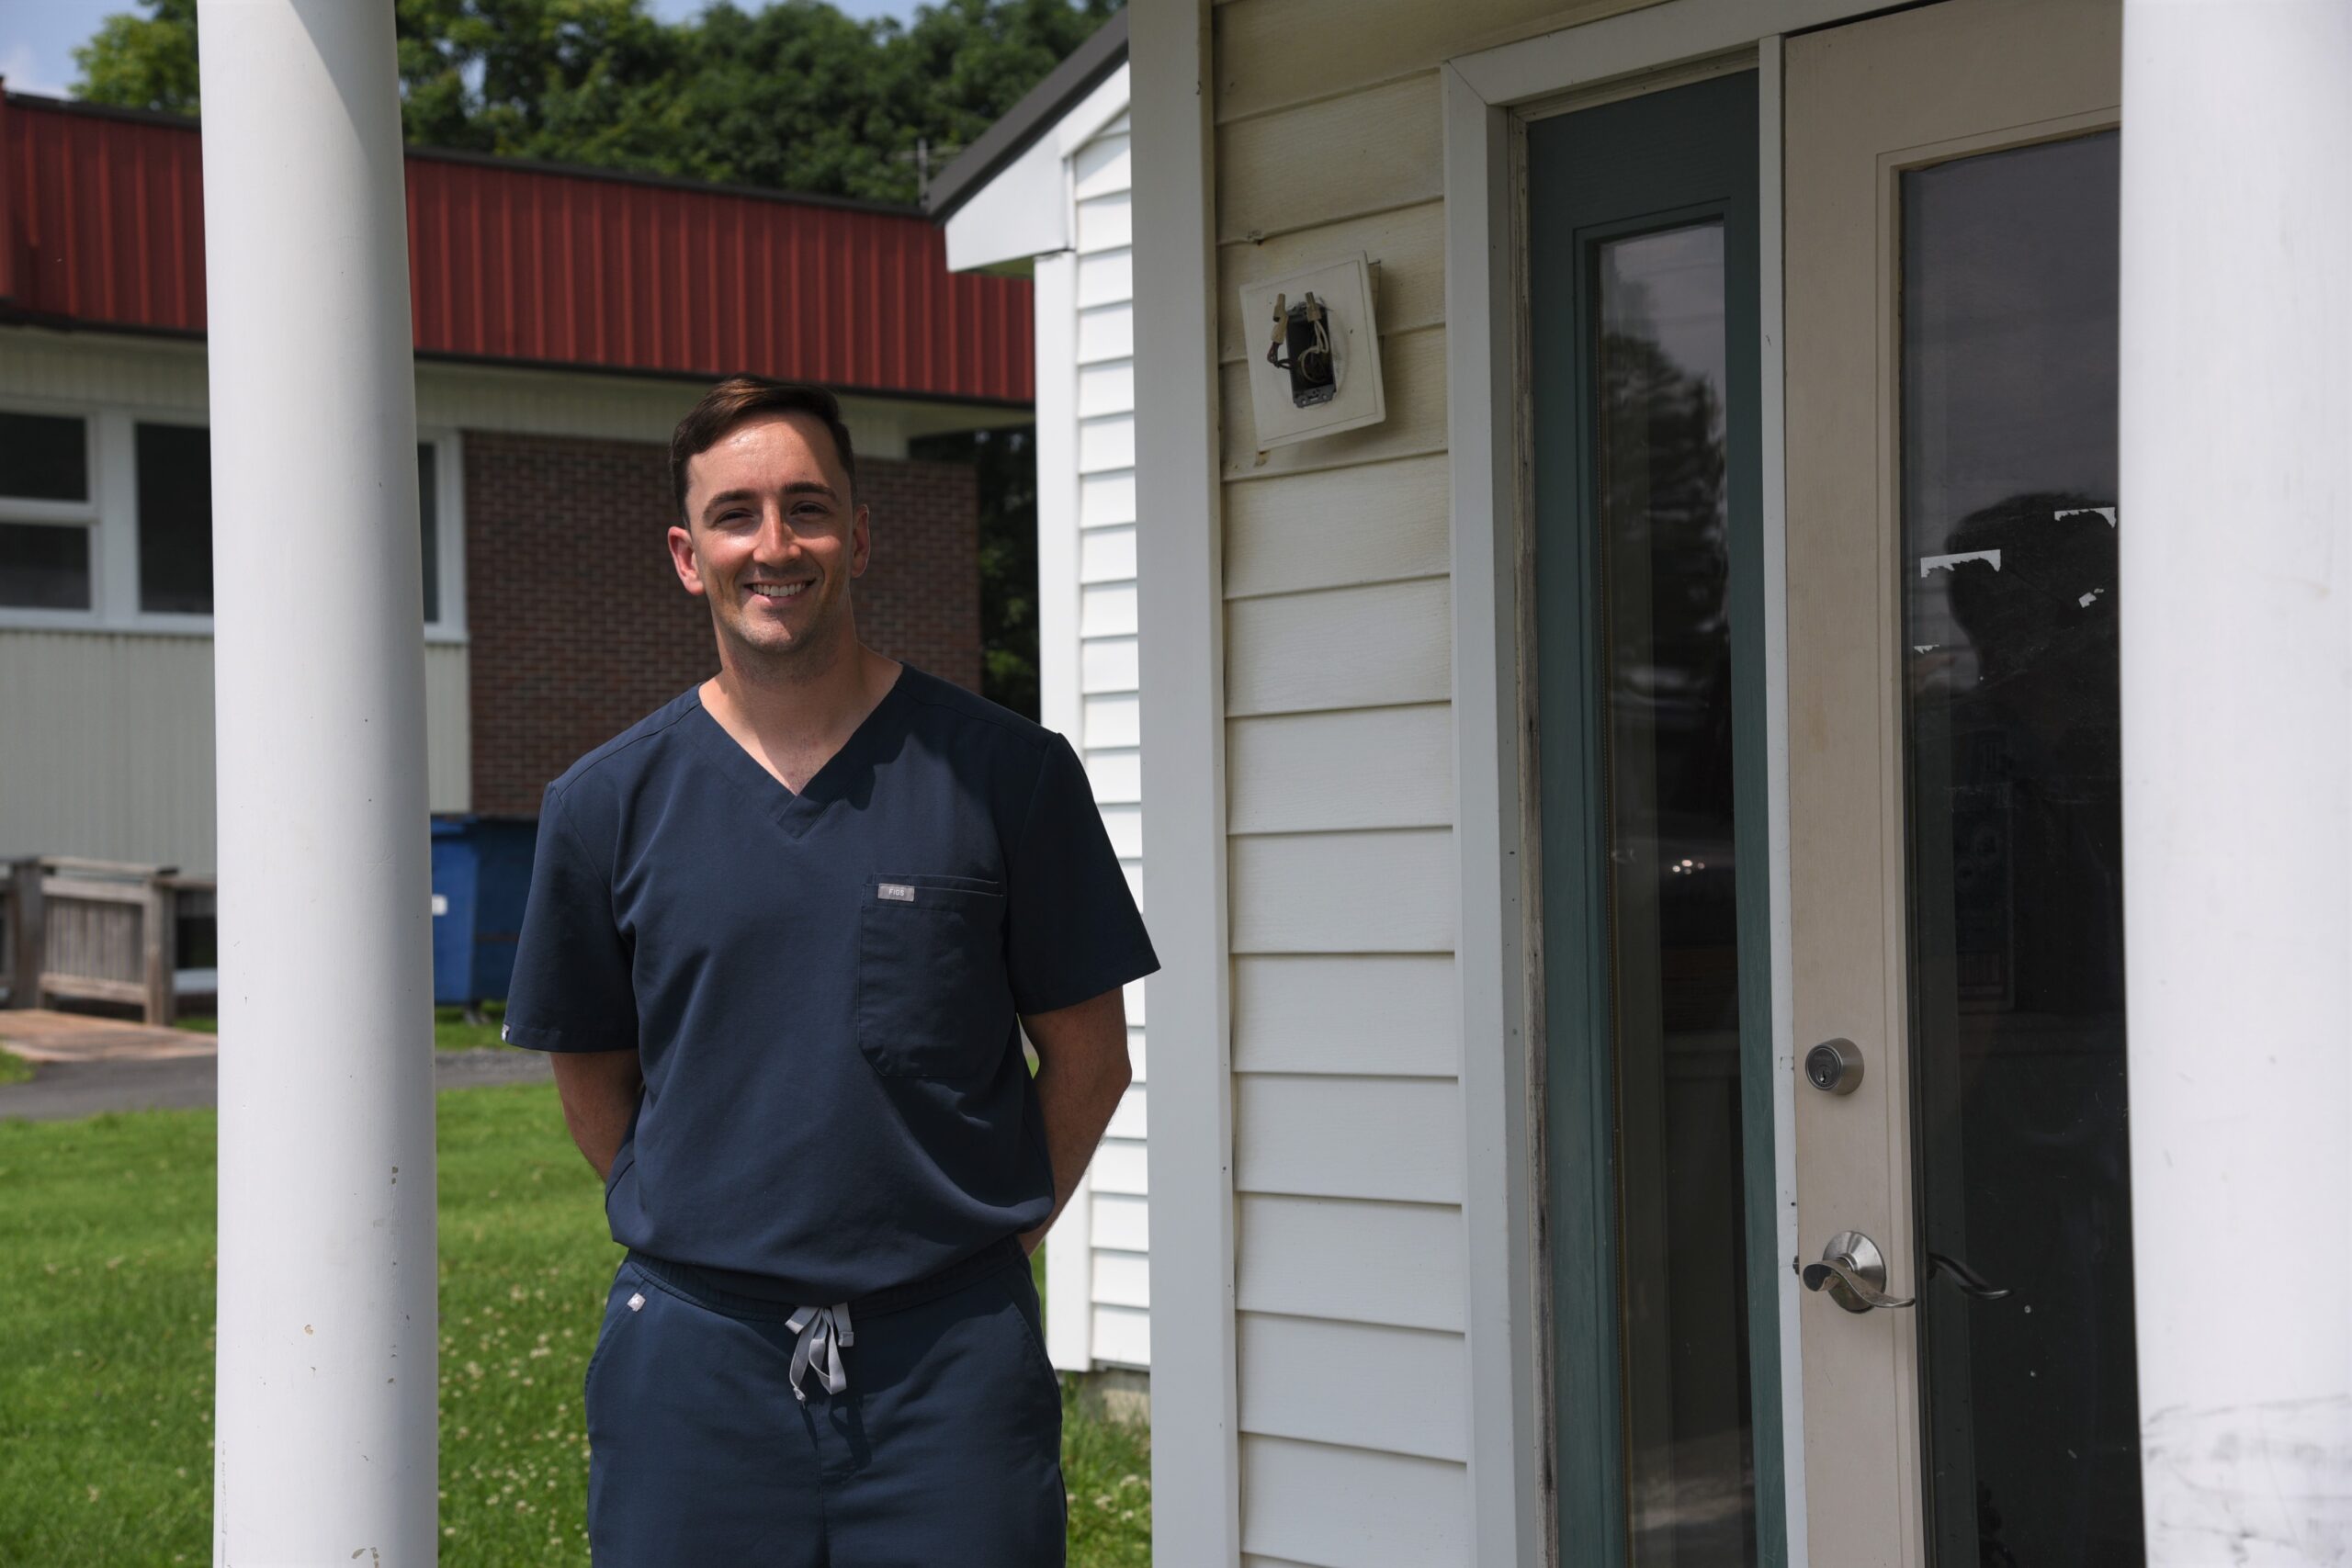 New owner of dental practice seems to be to develop in Presque Isle